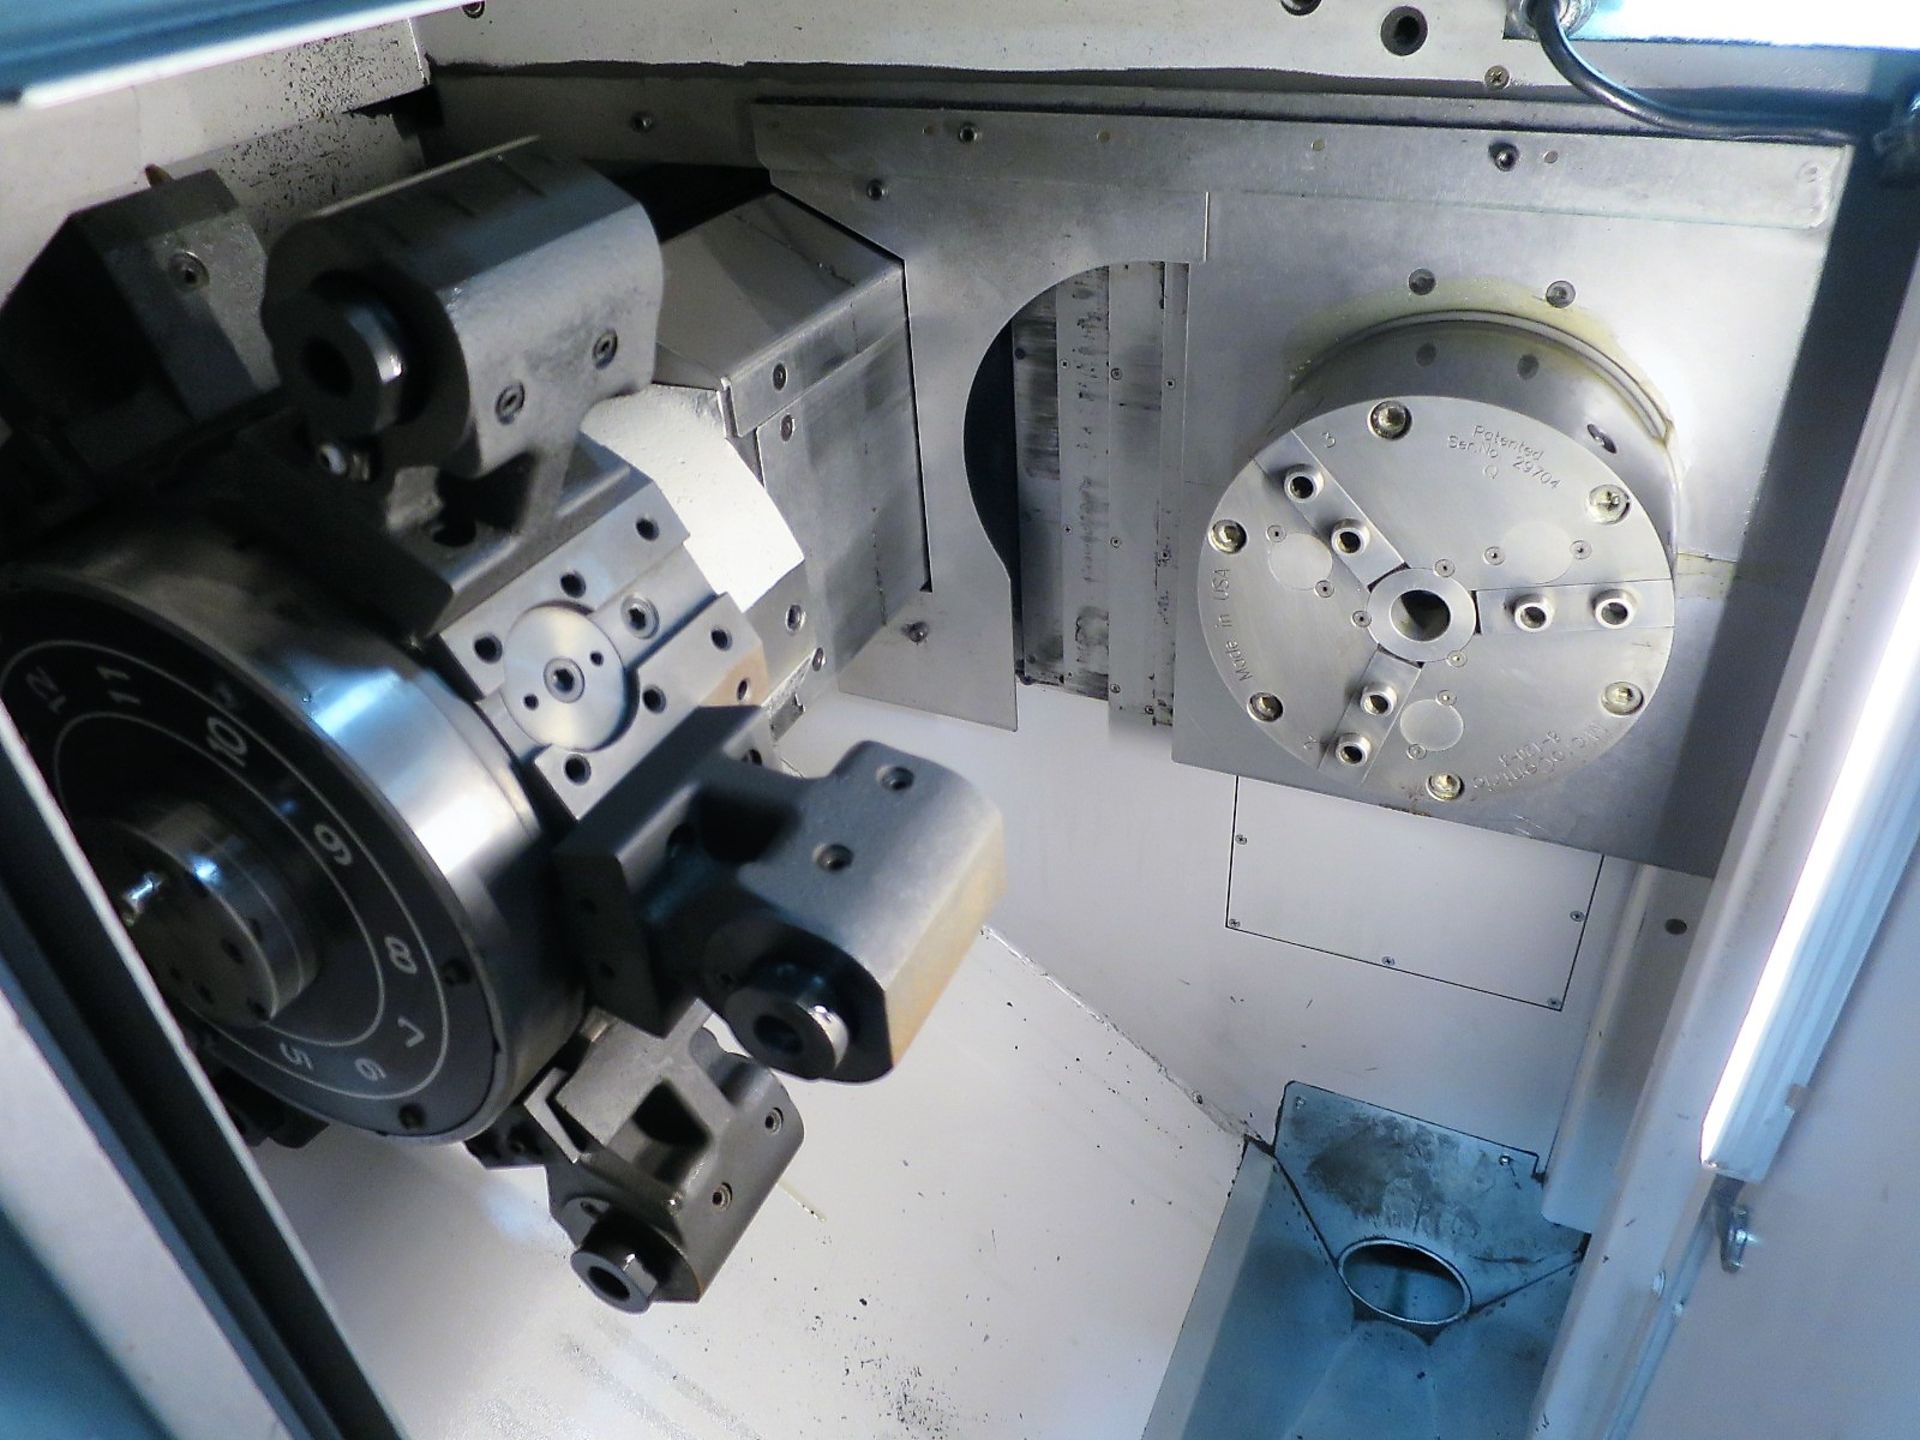 Okuma 2SP-150HM Twin Spindle 3-Axis Turning Center w/Live Milling, S/N 156690, New 2011 - Image 4 of 12